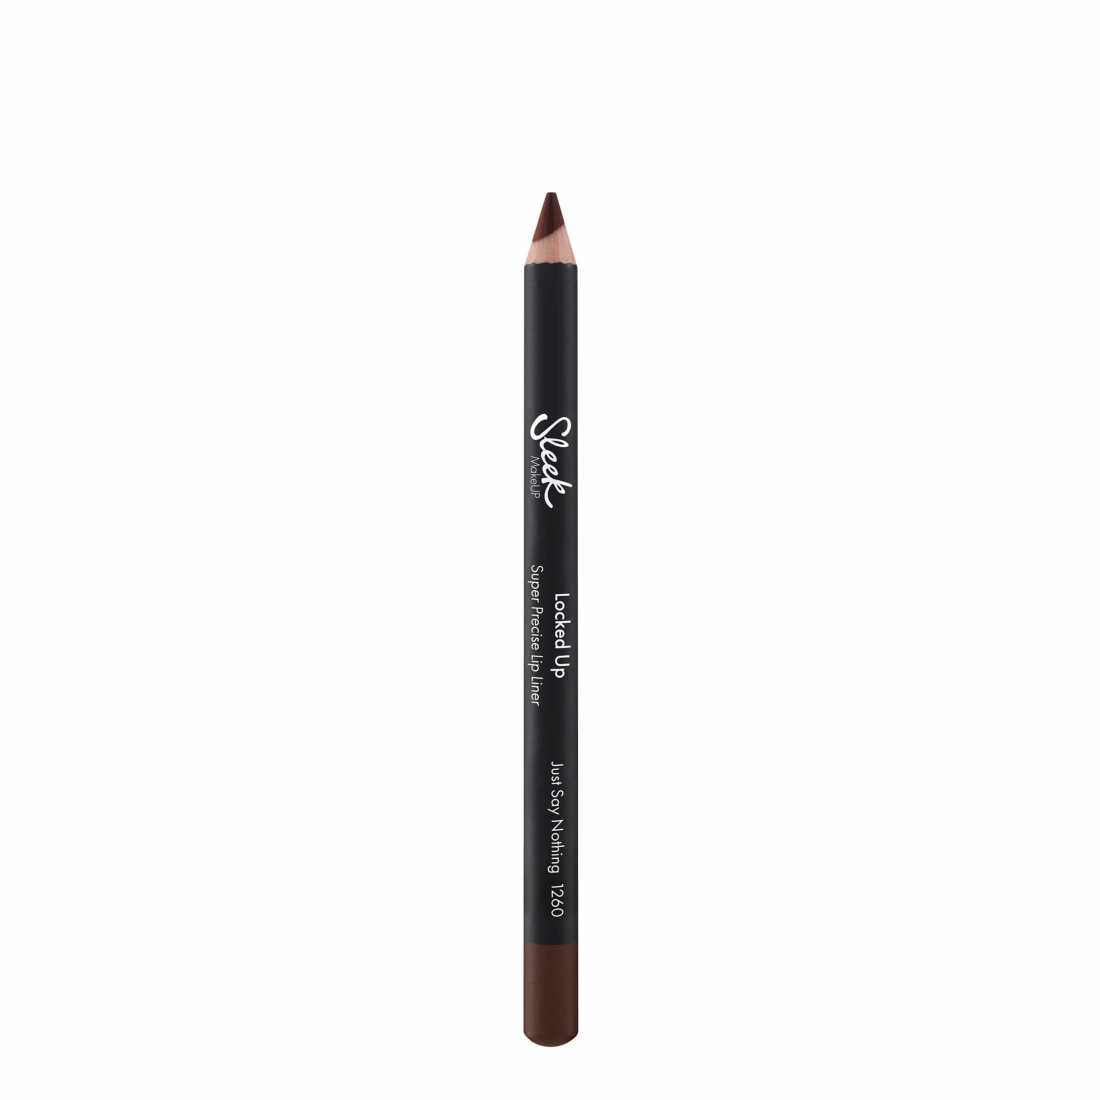 'Locked Up Super Precise' Lip Liner - Just Say Nothing 1.79 g